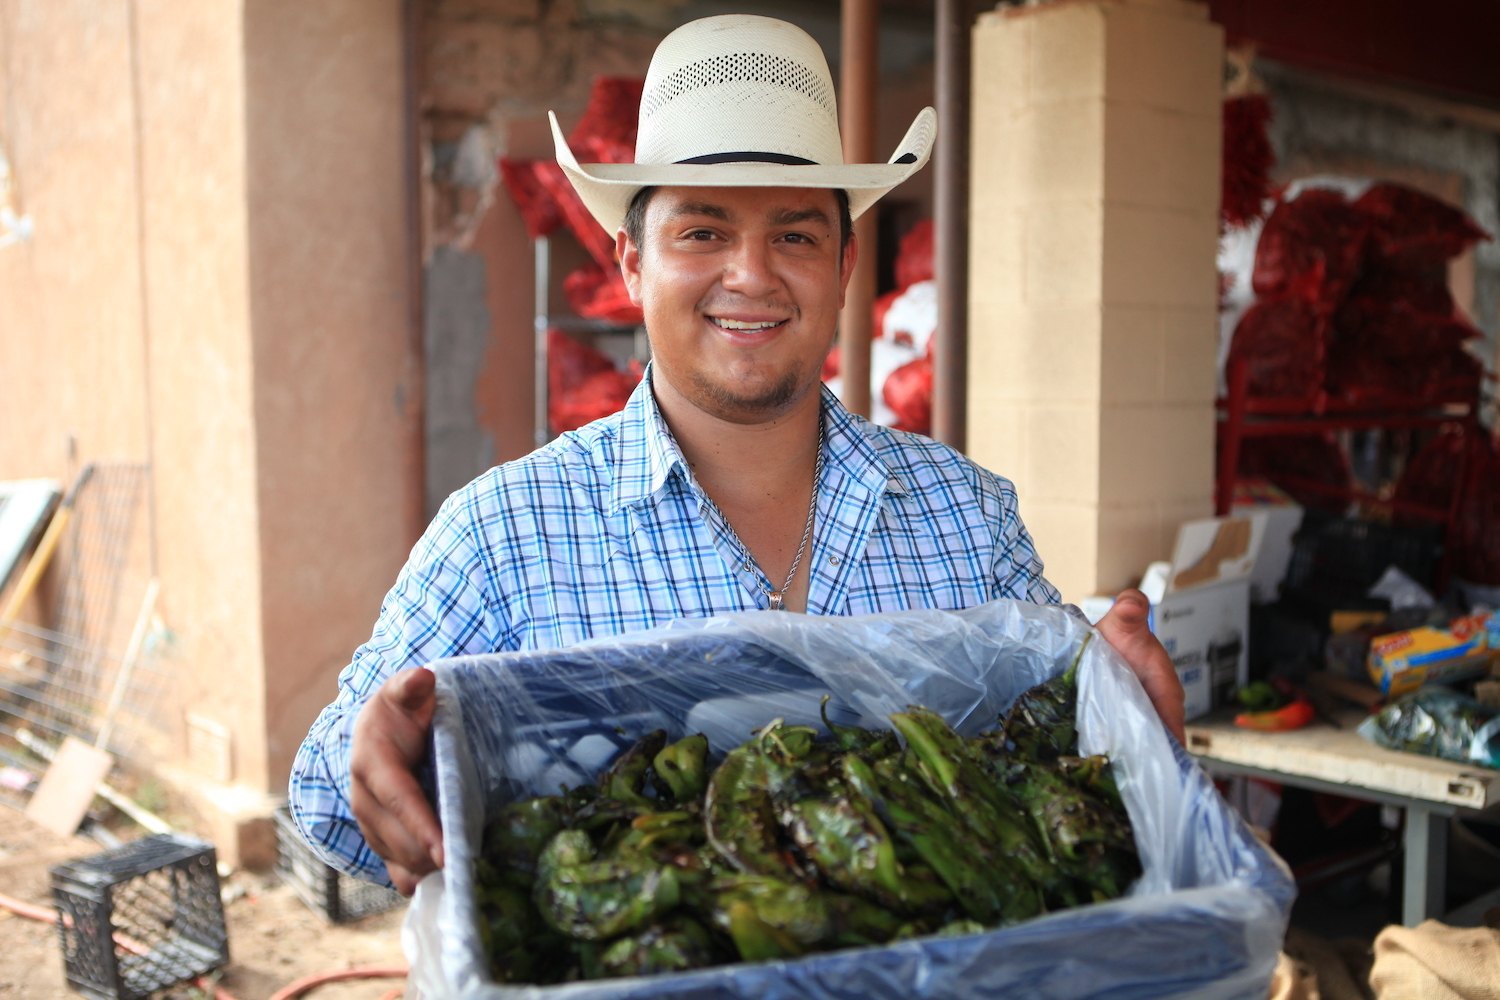 Jessie Moreno with roasted green chiles.